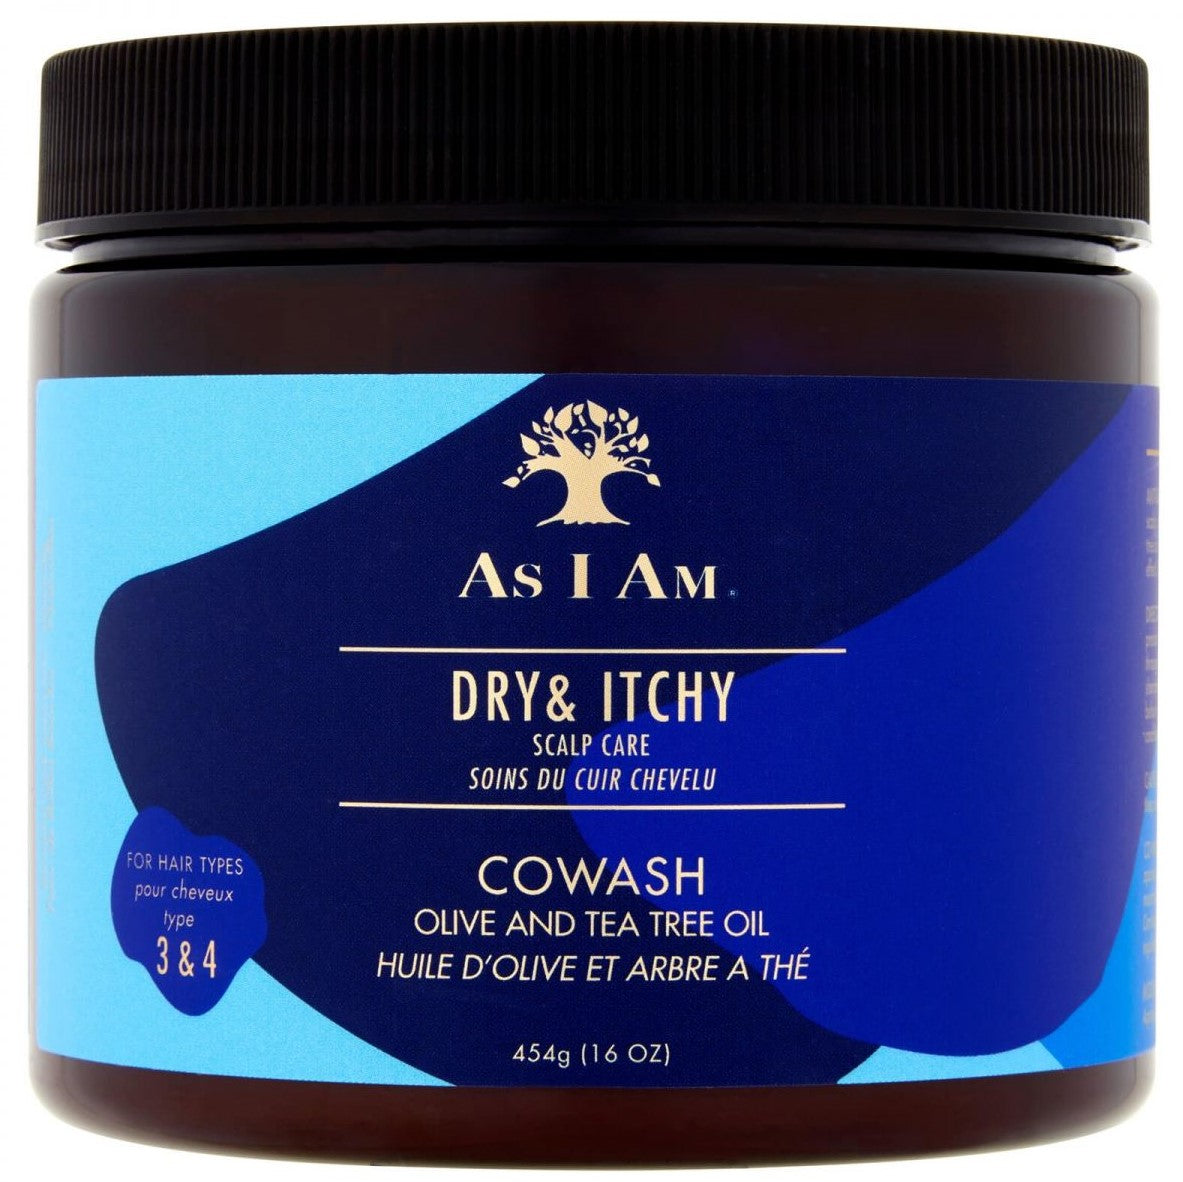 AS I AM DRY AND ITCHY SCALP CARE OLIVE AND TEA TREE OIL CO -WASH 454G - EFFECTIVE PURCHASE CARE